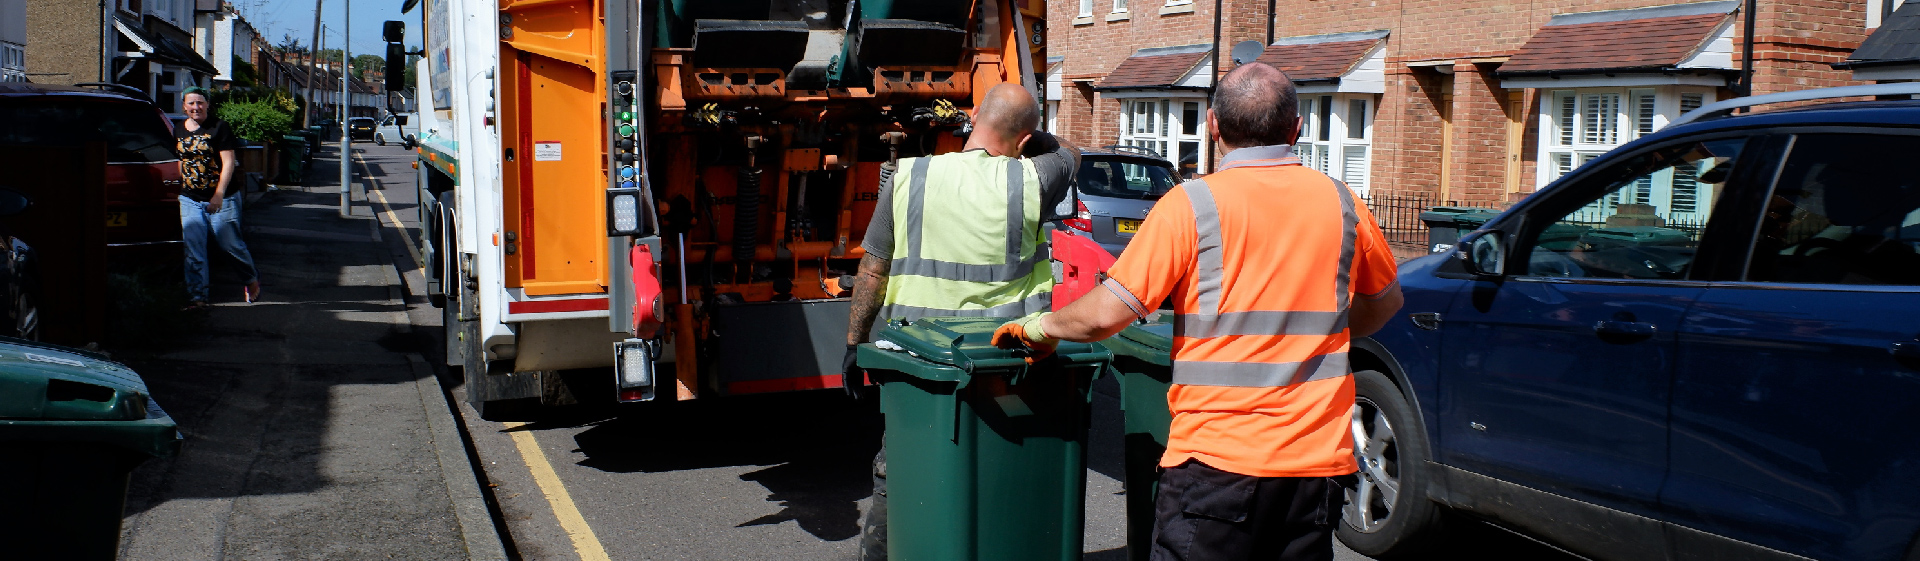 Recycling issues unresolved after one week